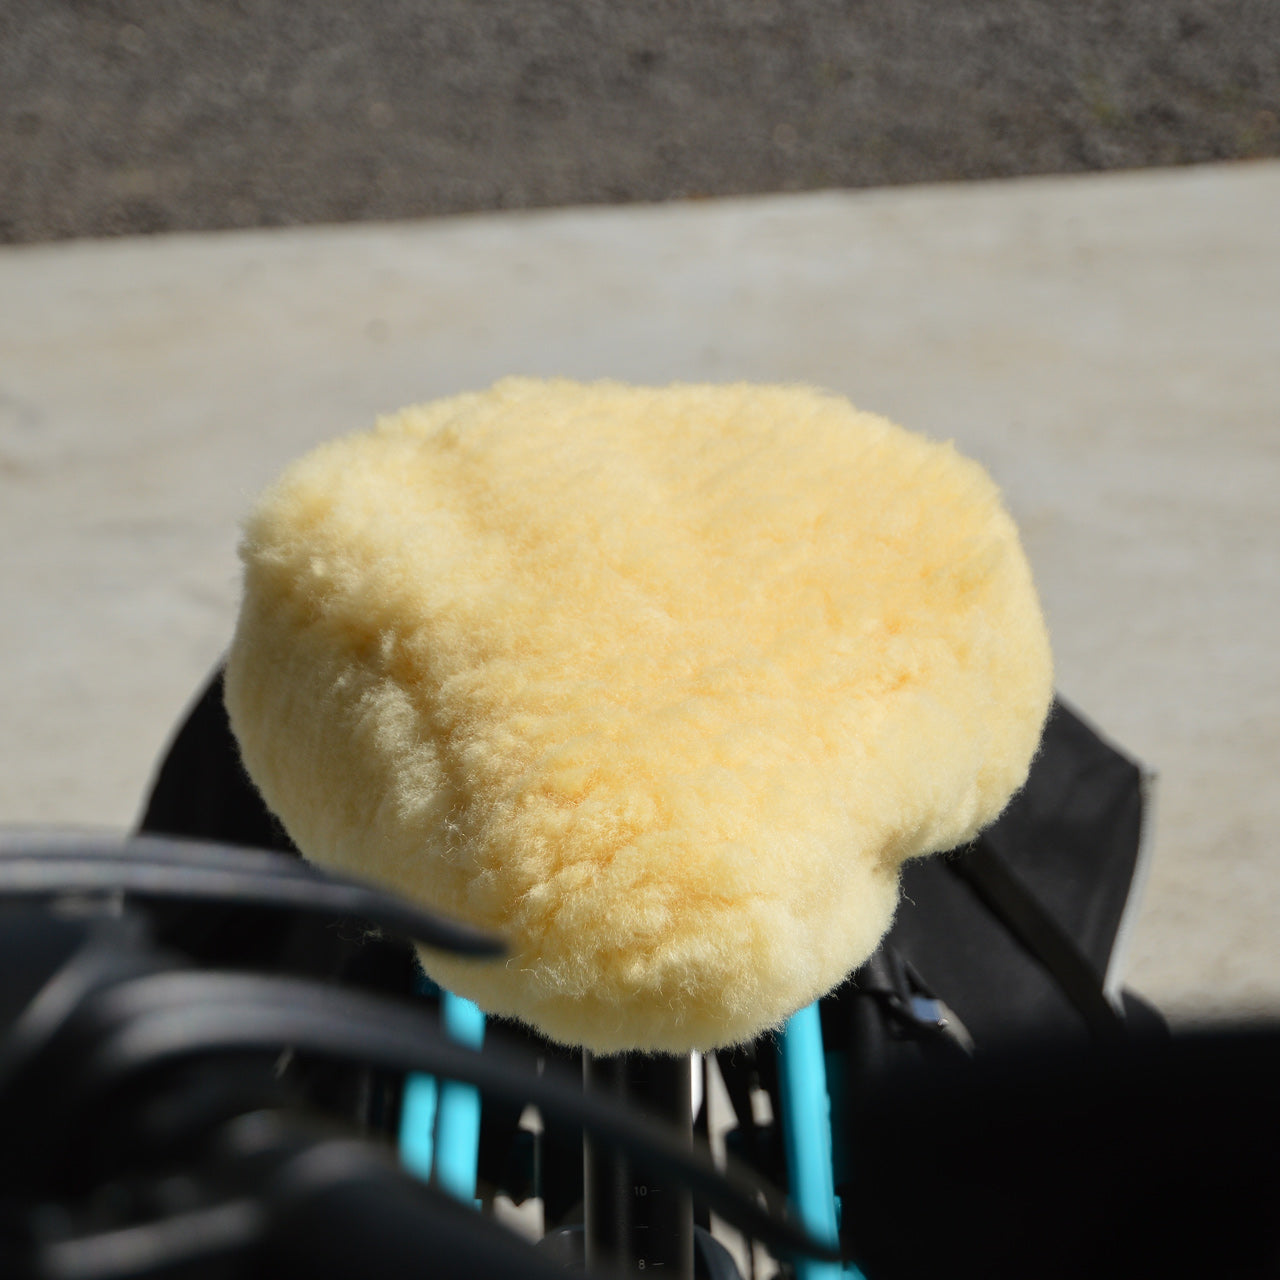 Lambskin Bicycle Seat Cover